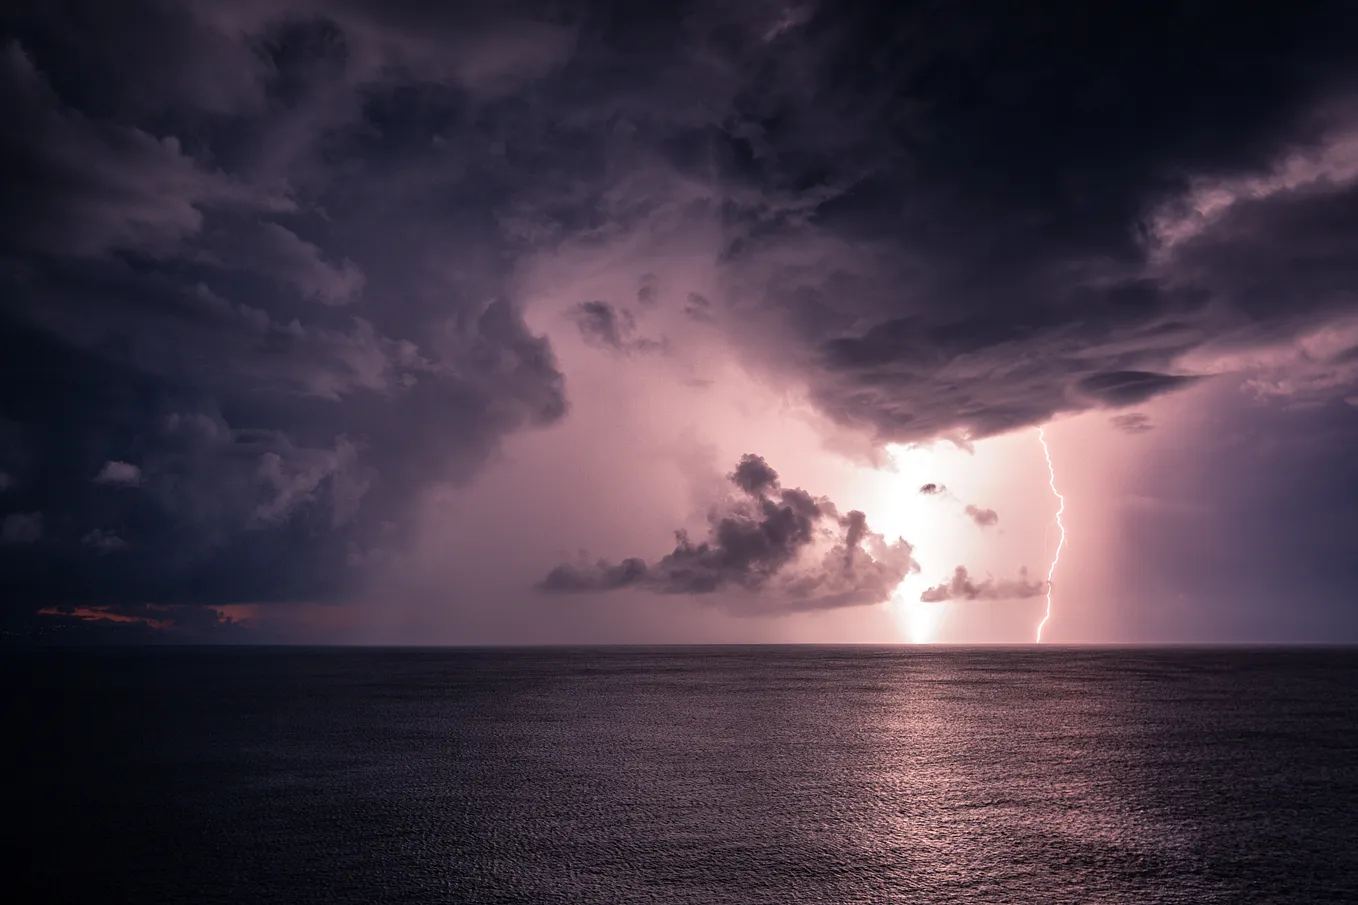 Sea with storm clouds and lightning